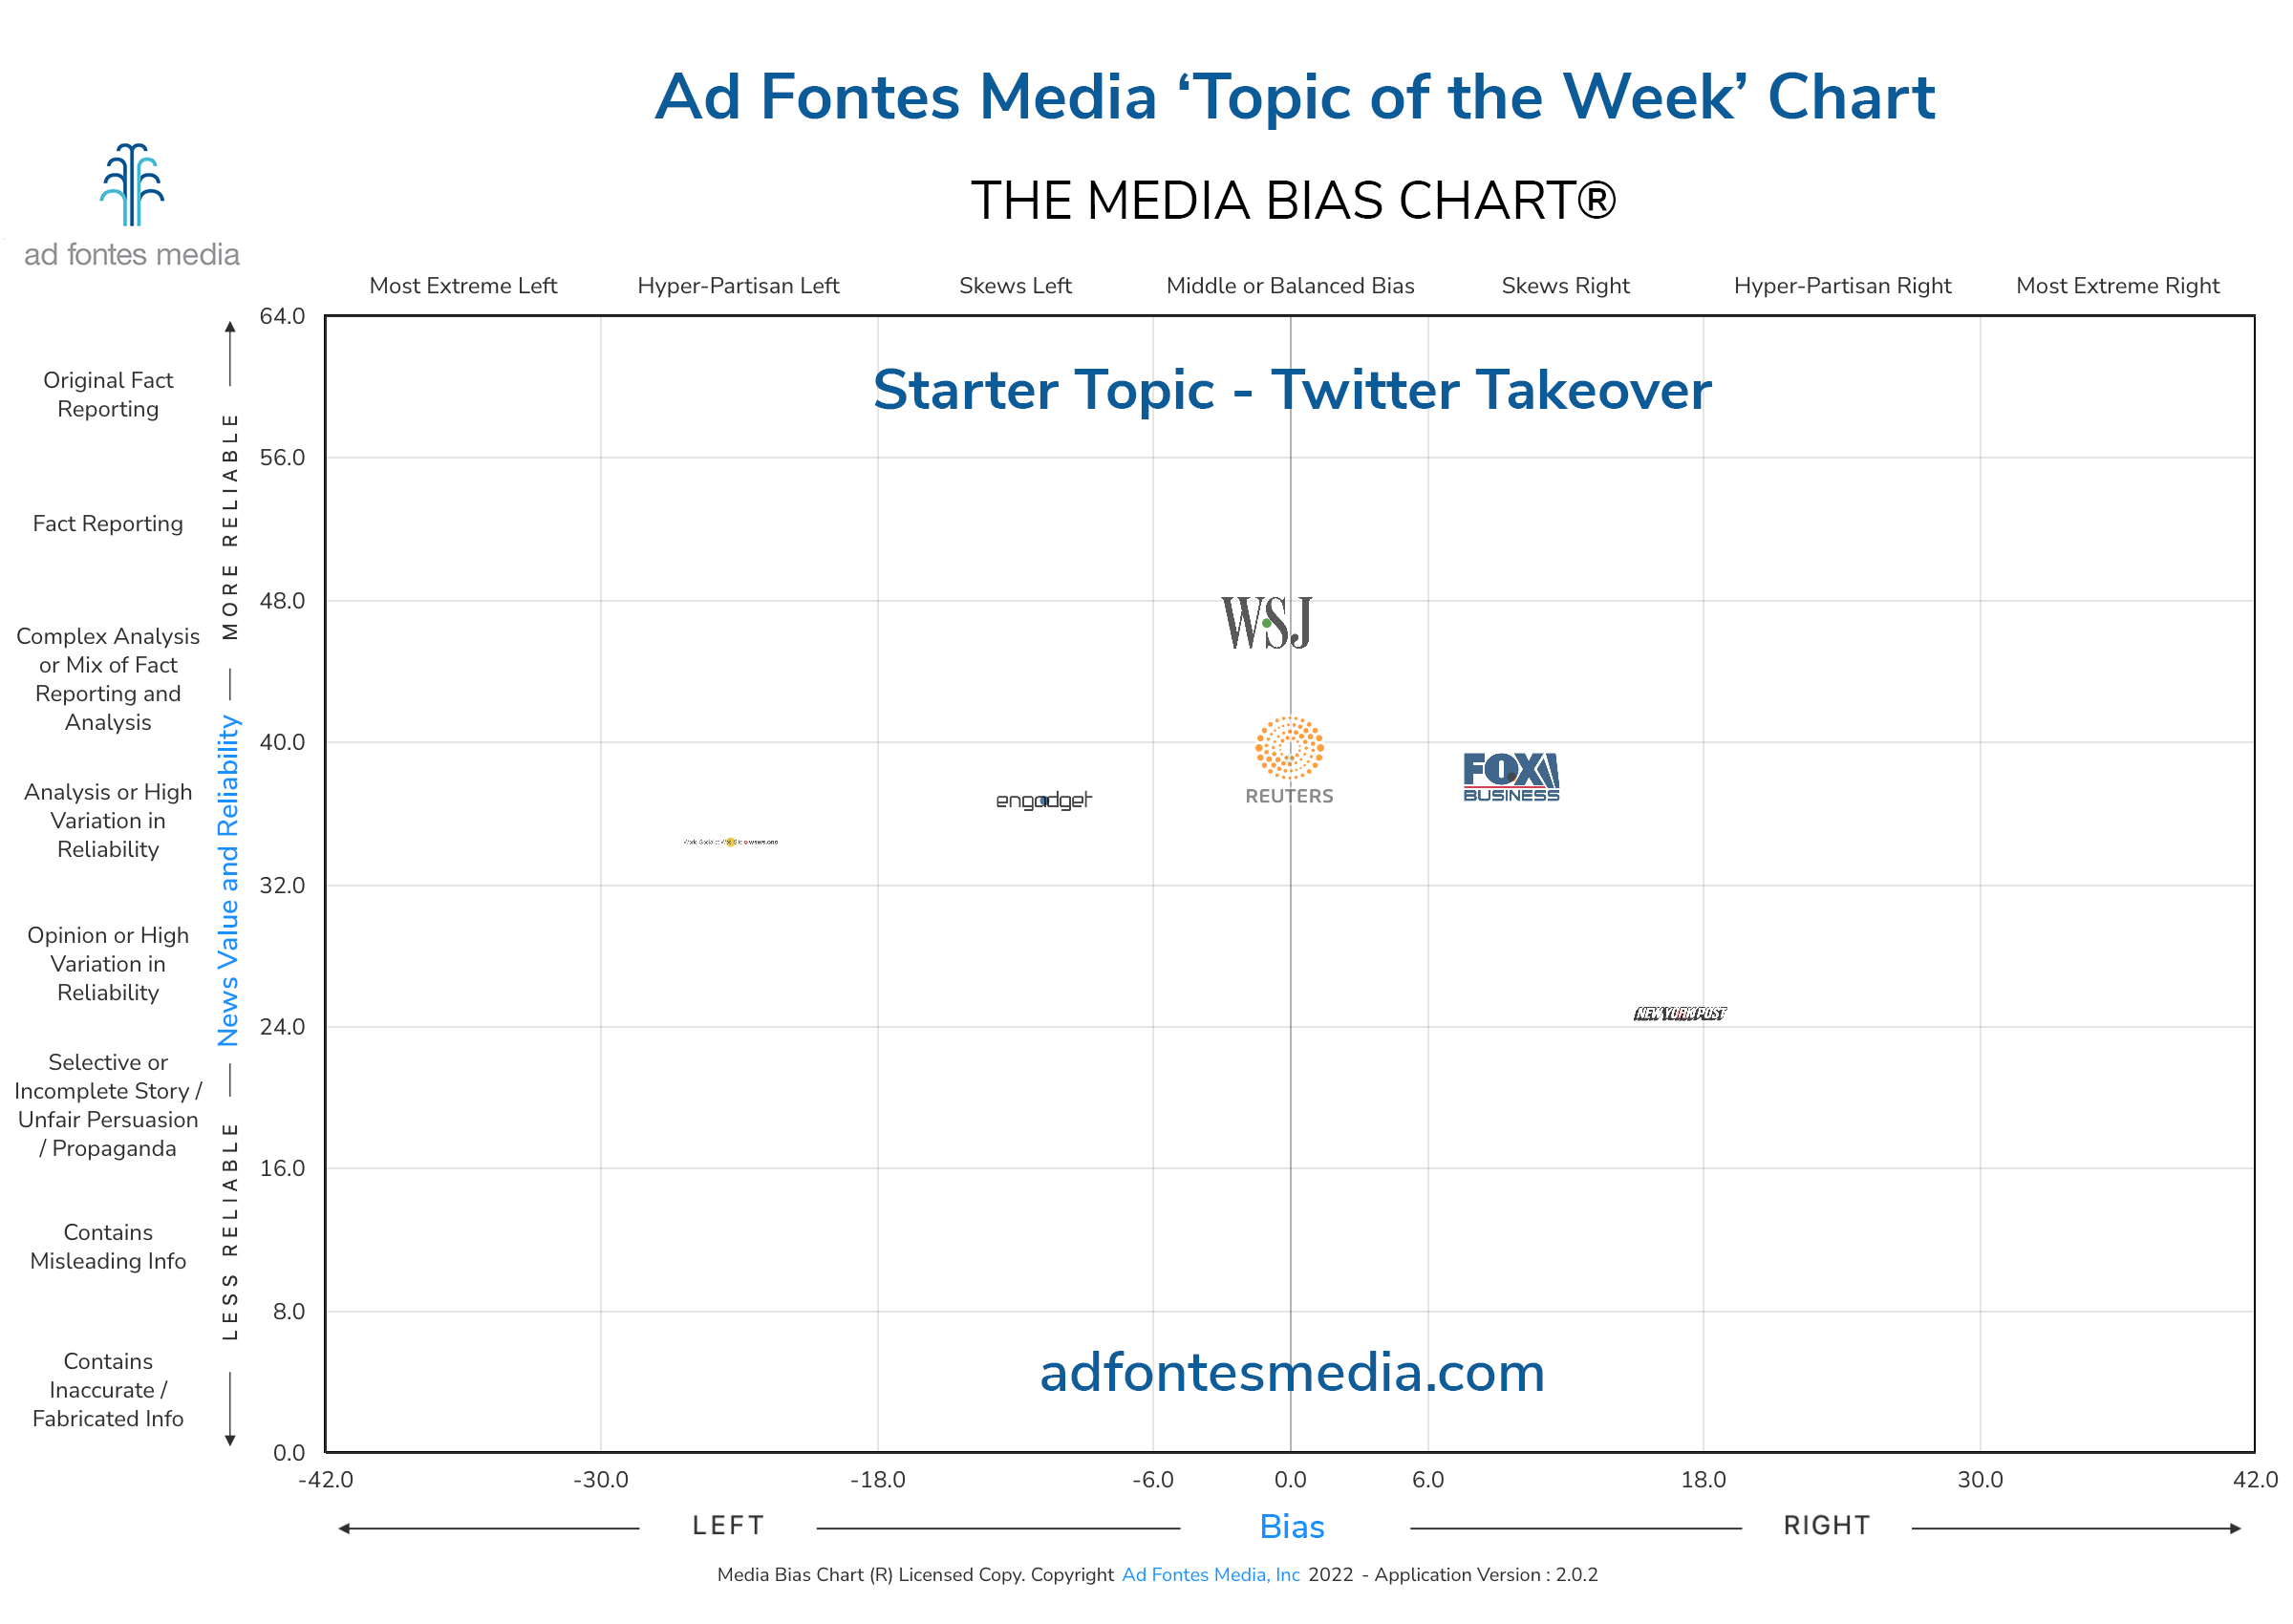 Scores of the Twitter Takeover articles on the chart